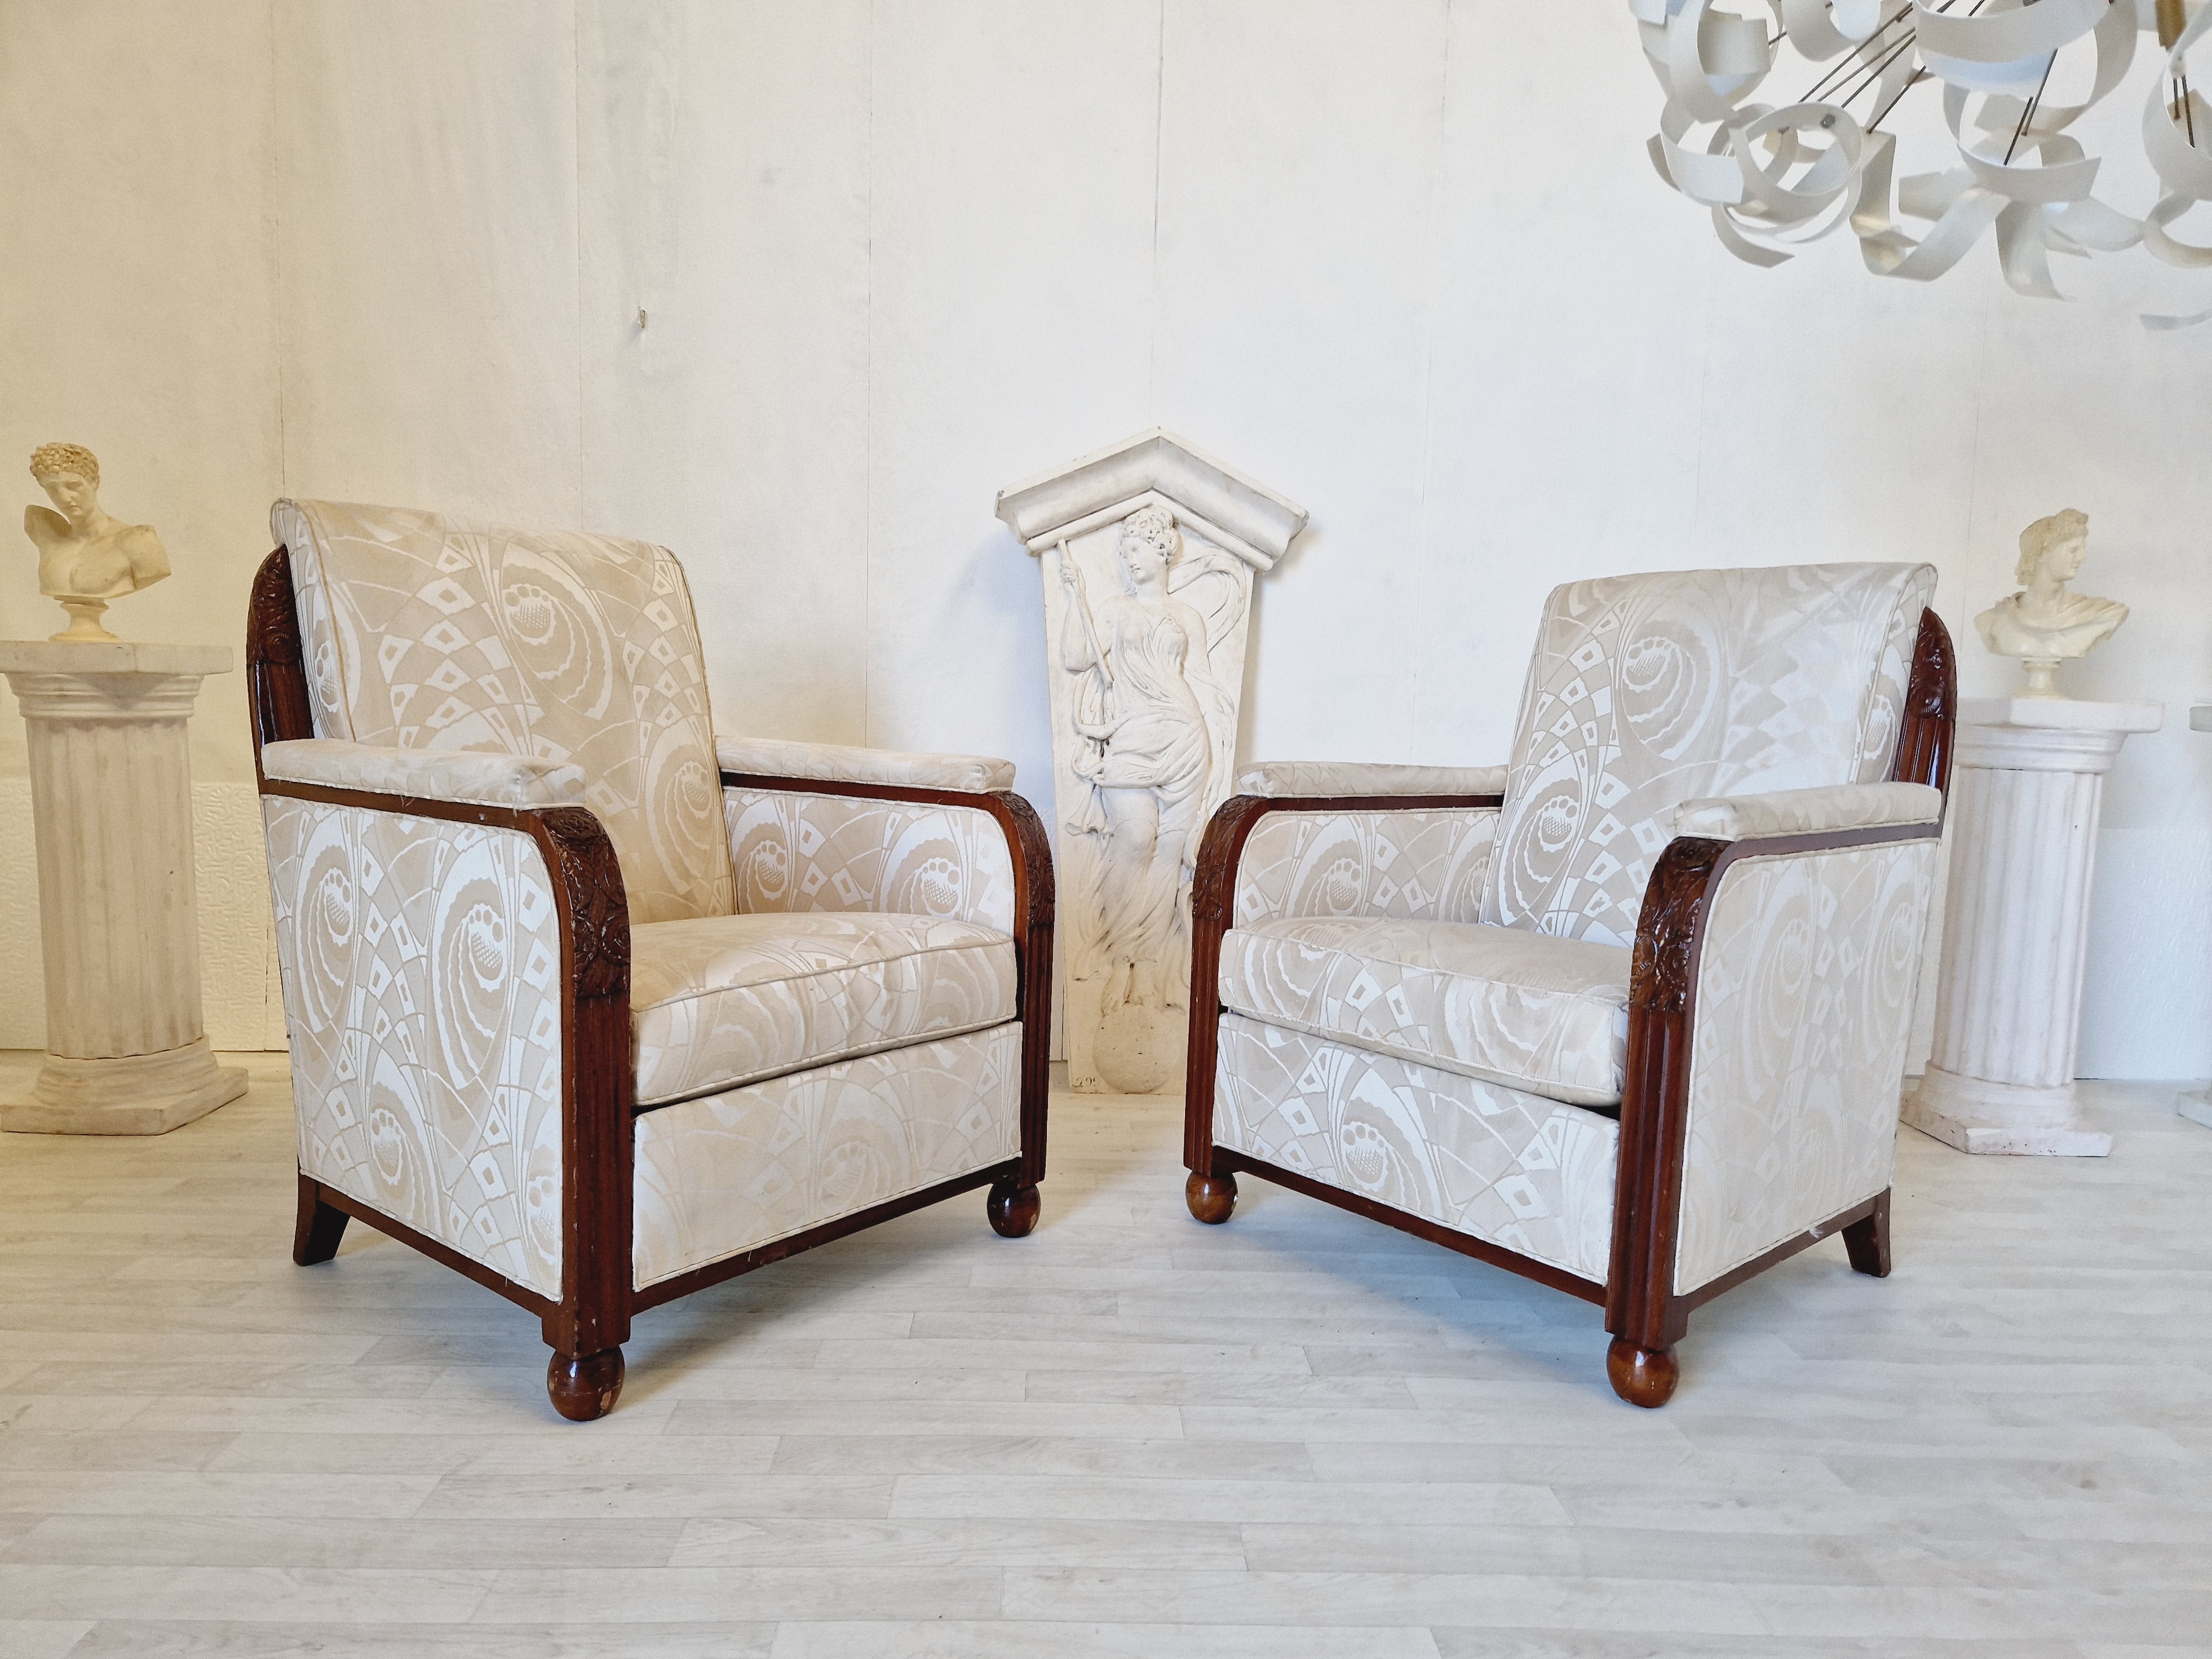 This pair of vintage Art Deco Armchairs are from the 1930s and feature a beautiful cube style design with a white colour upholstery and walnut frame. This set includes two chairs made of walnut and upholstered with satin synthetic type fabric. The